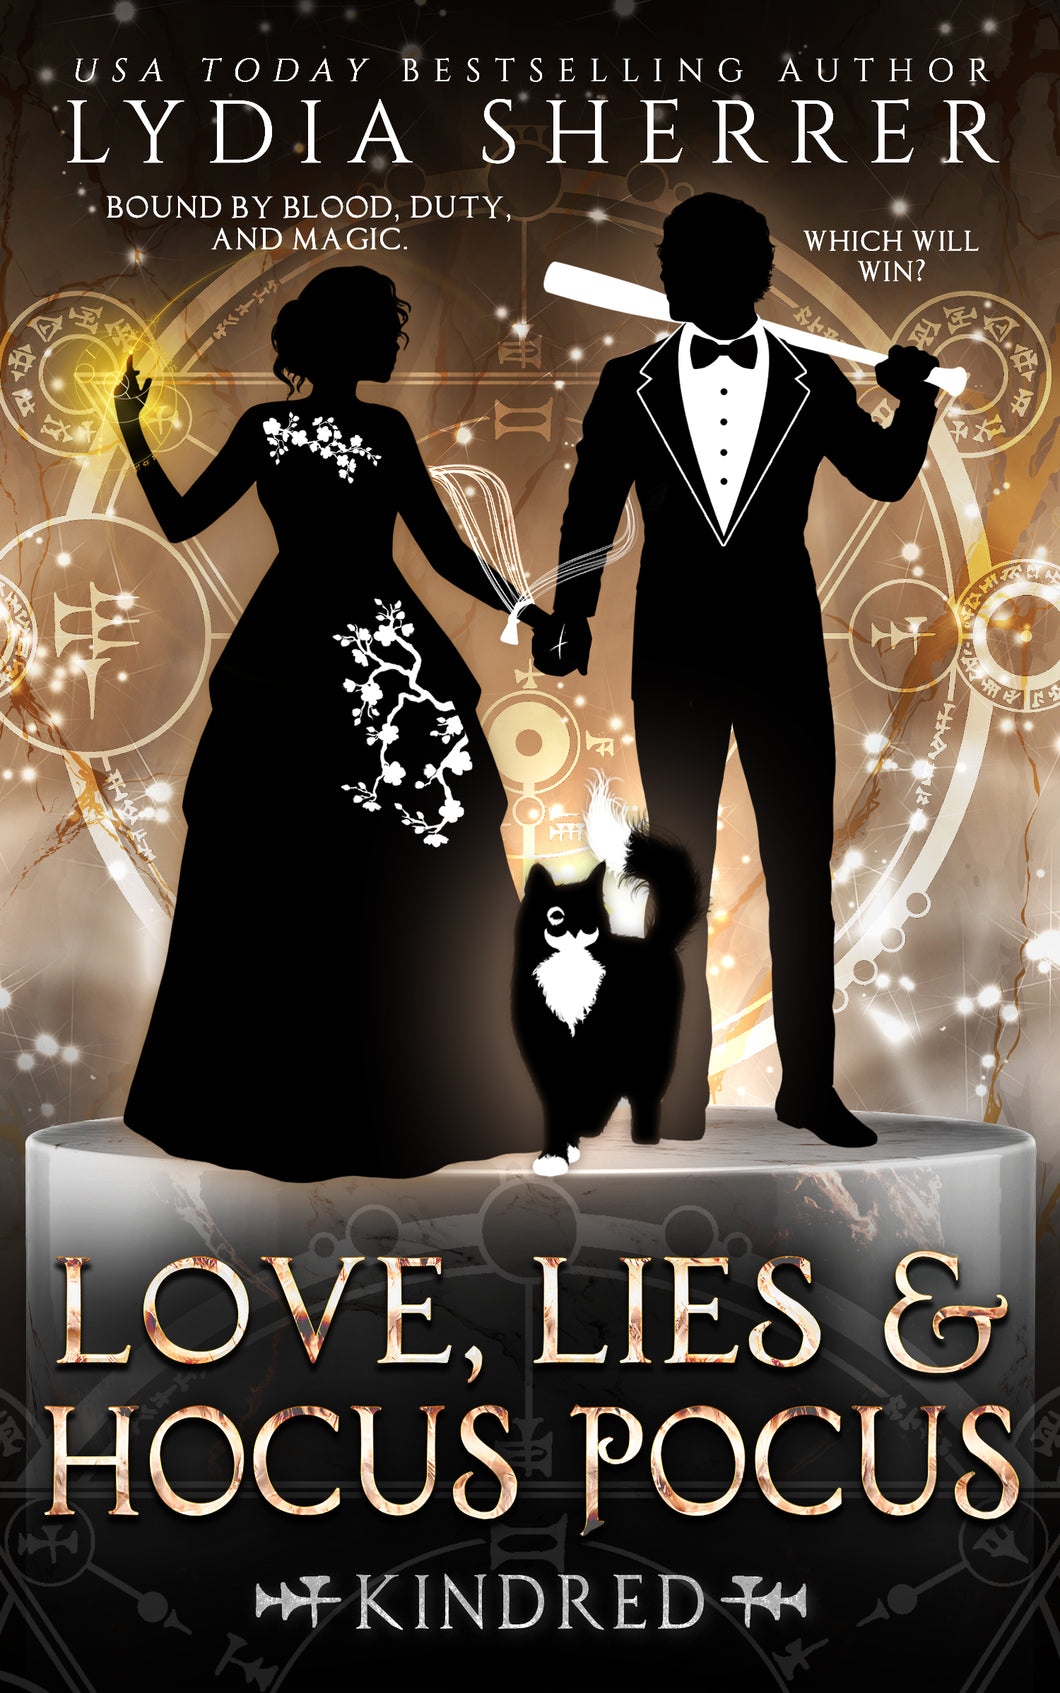 Paperback Book - Love, Lies, and Hocus Pocus Kindred (the Lily Singer Adventures, Book 7)